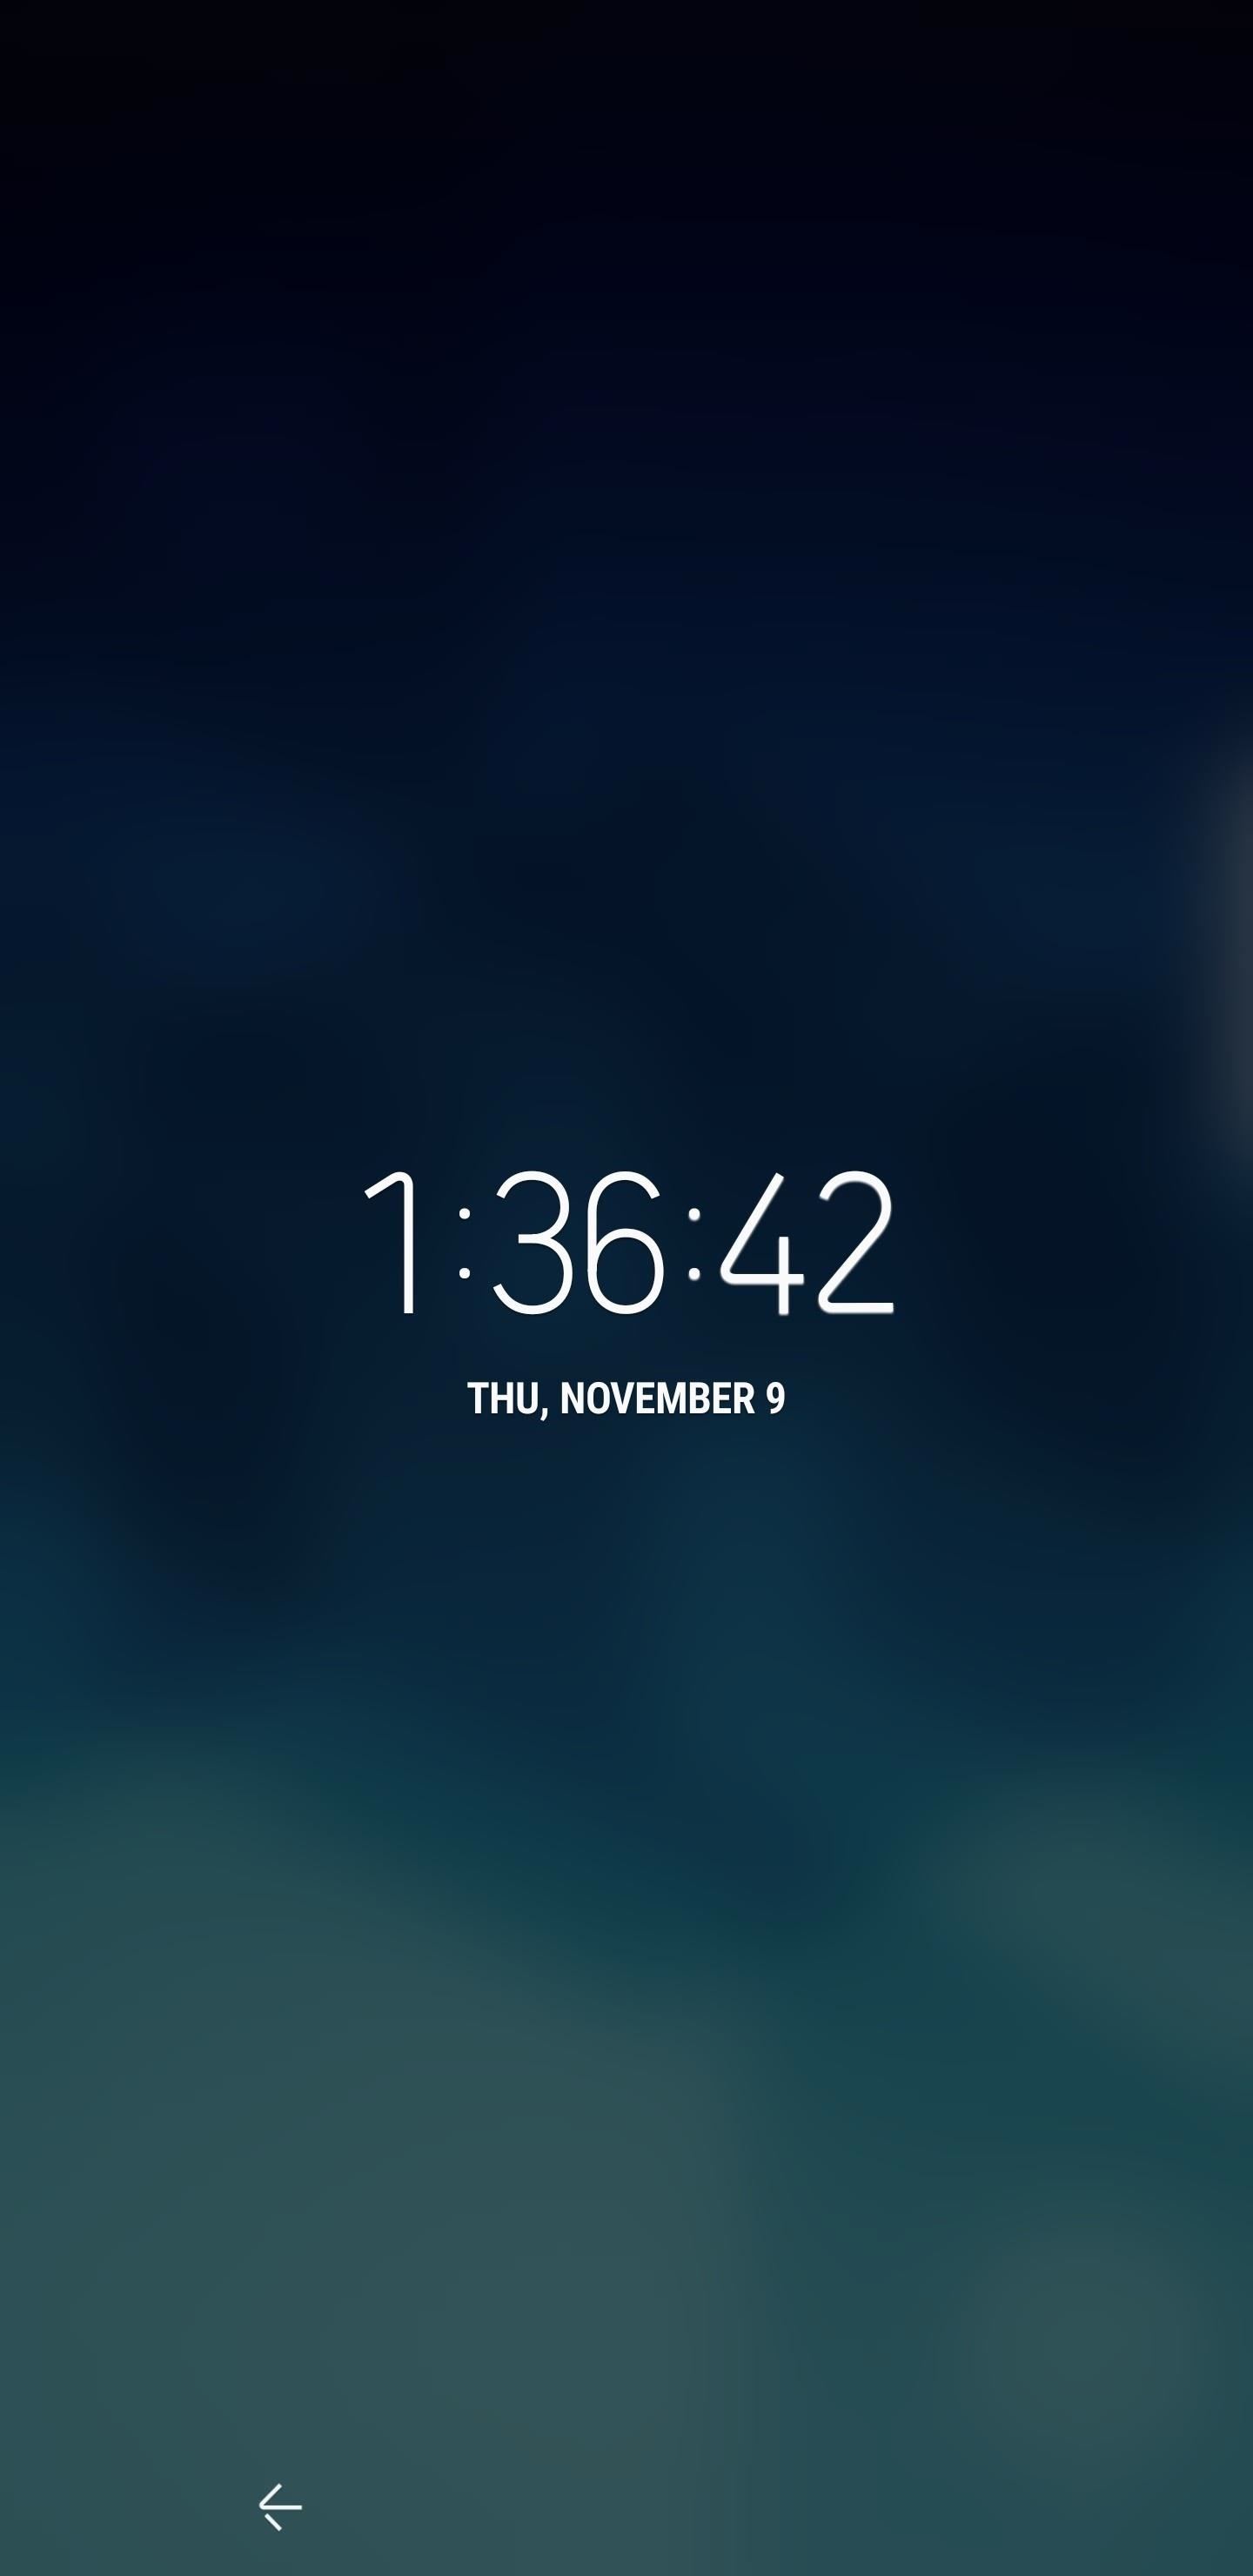 Galaxy S8 Oreo Update: Lock Screen Clock Now Matches Wallpaper Color